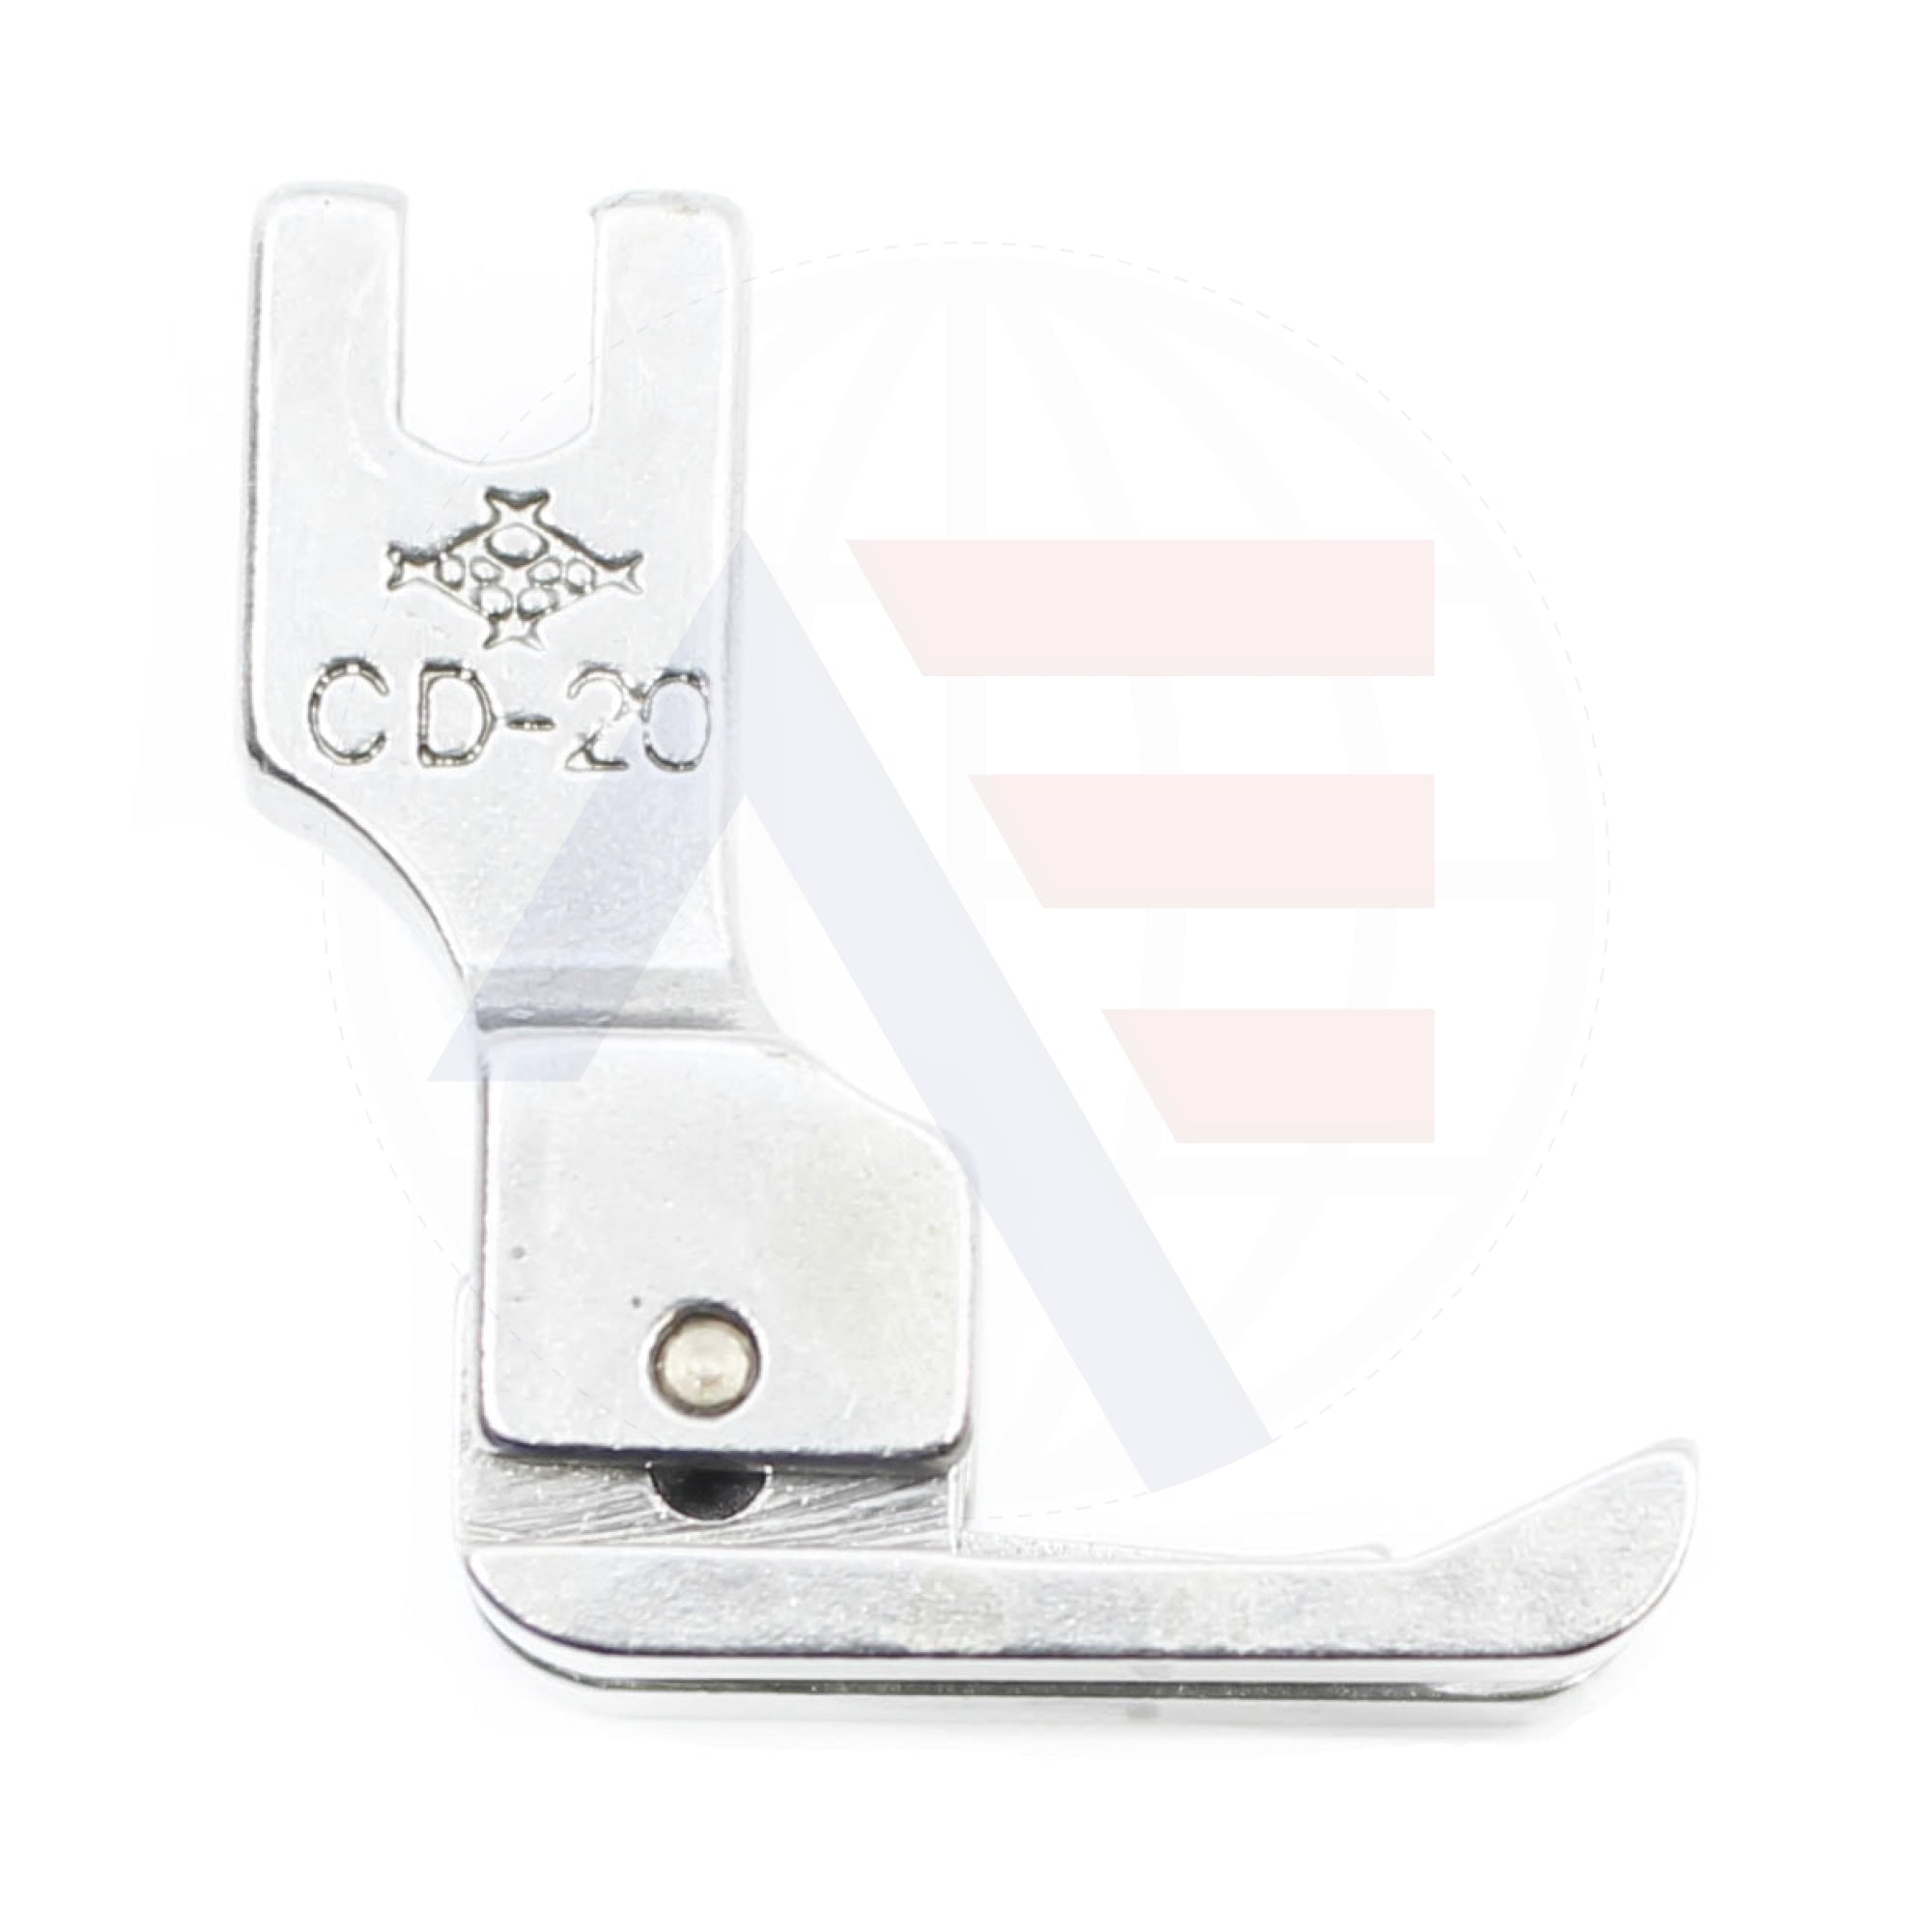 Cd20C 2.0Mm Double Compensating Foot Sewing Machine Spare Parts